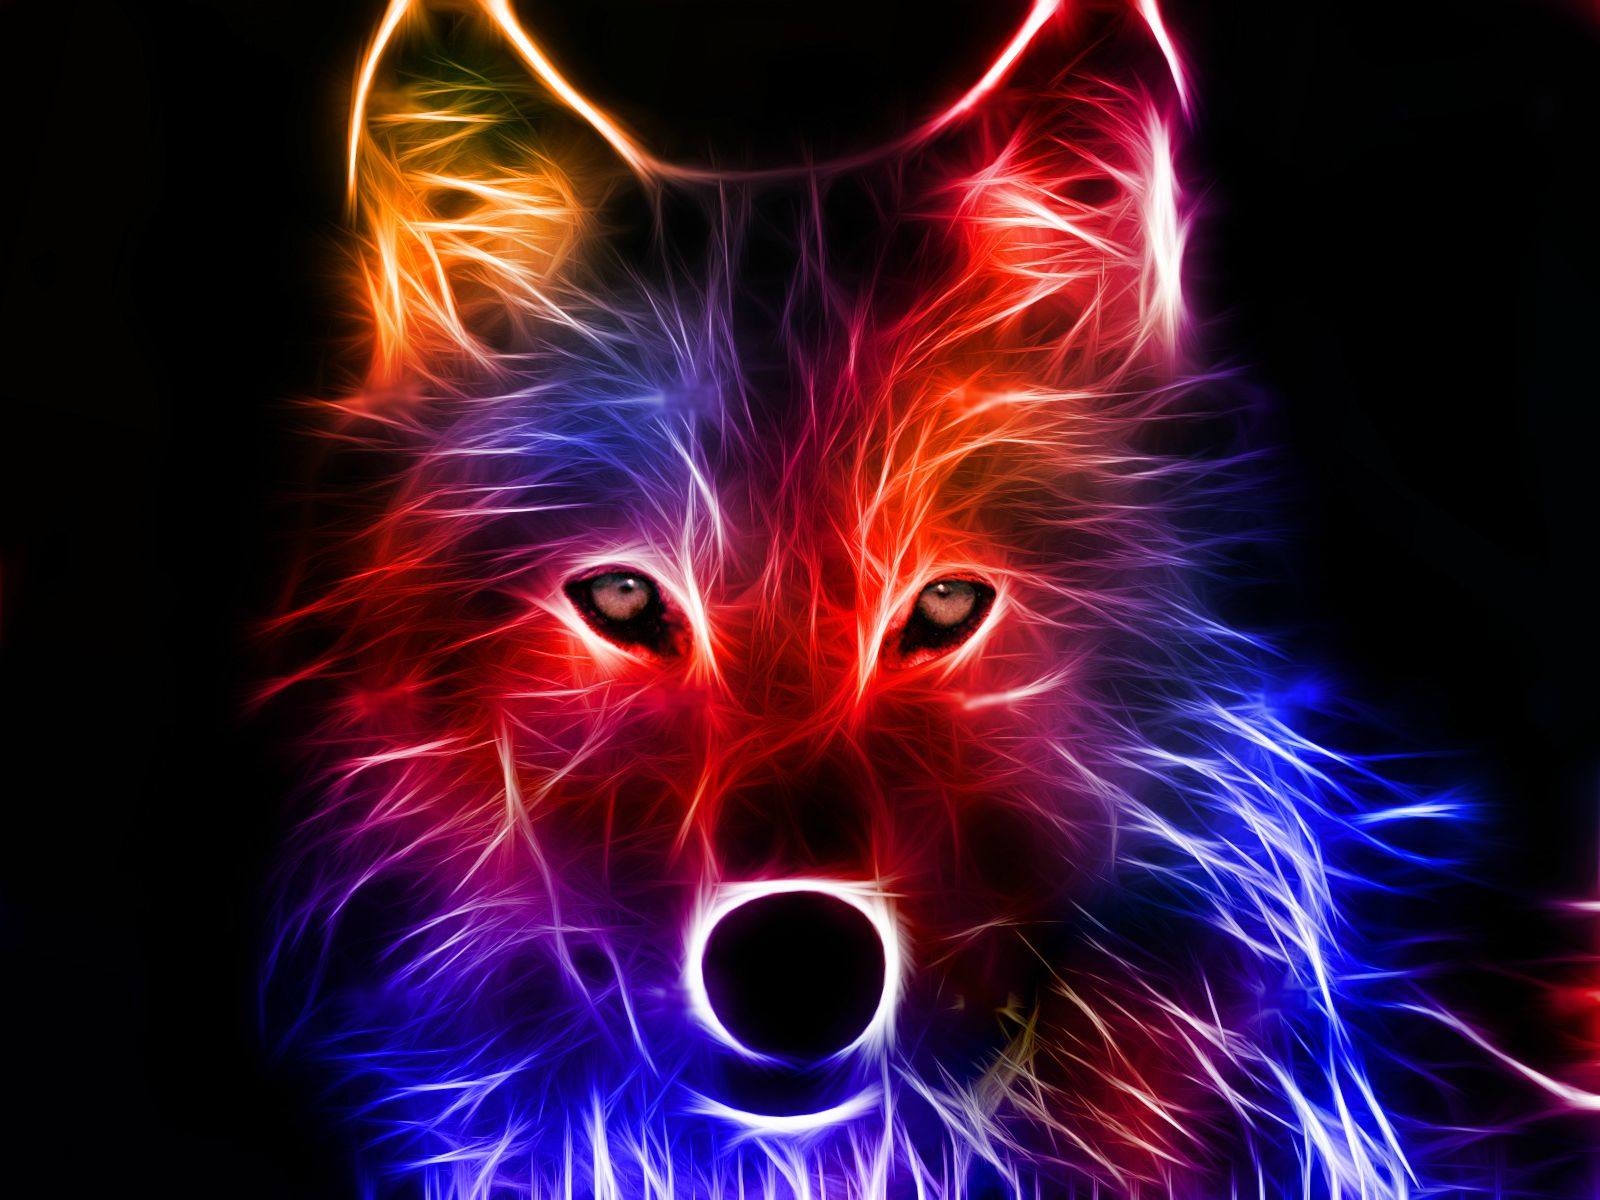 fox hd 3D wallpaper images Free wide wallpapers download Free